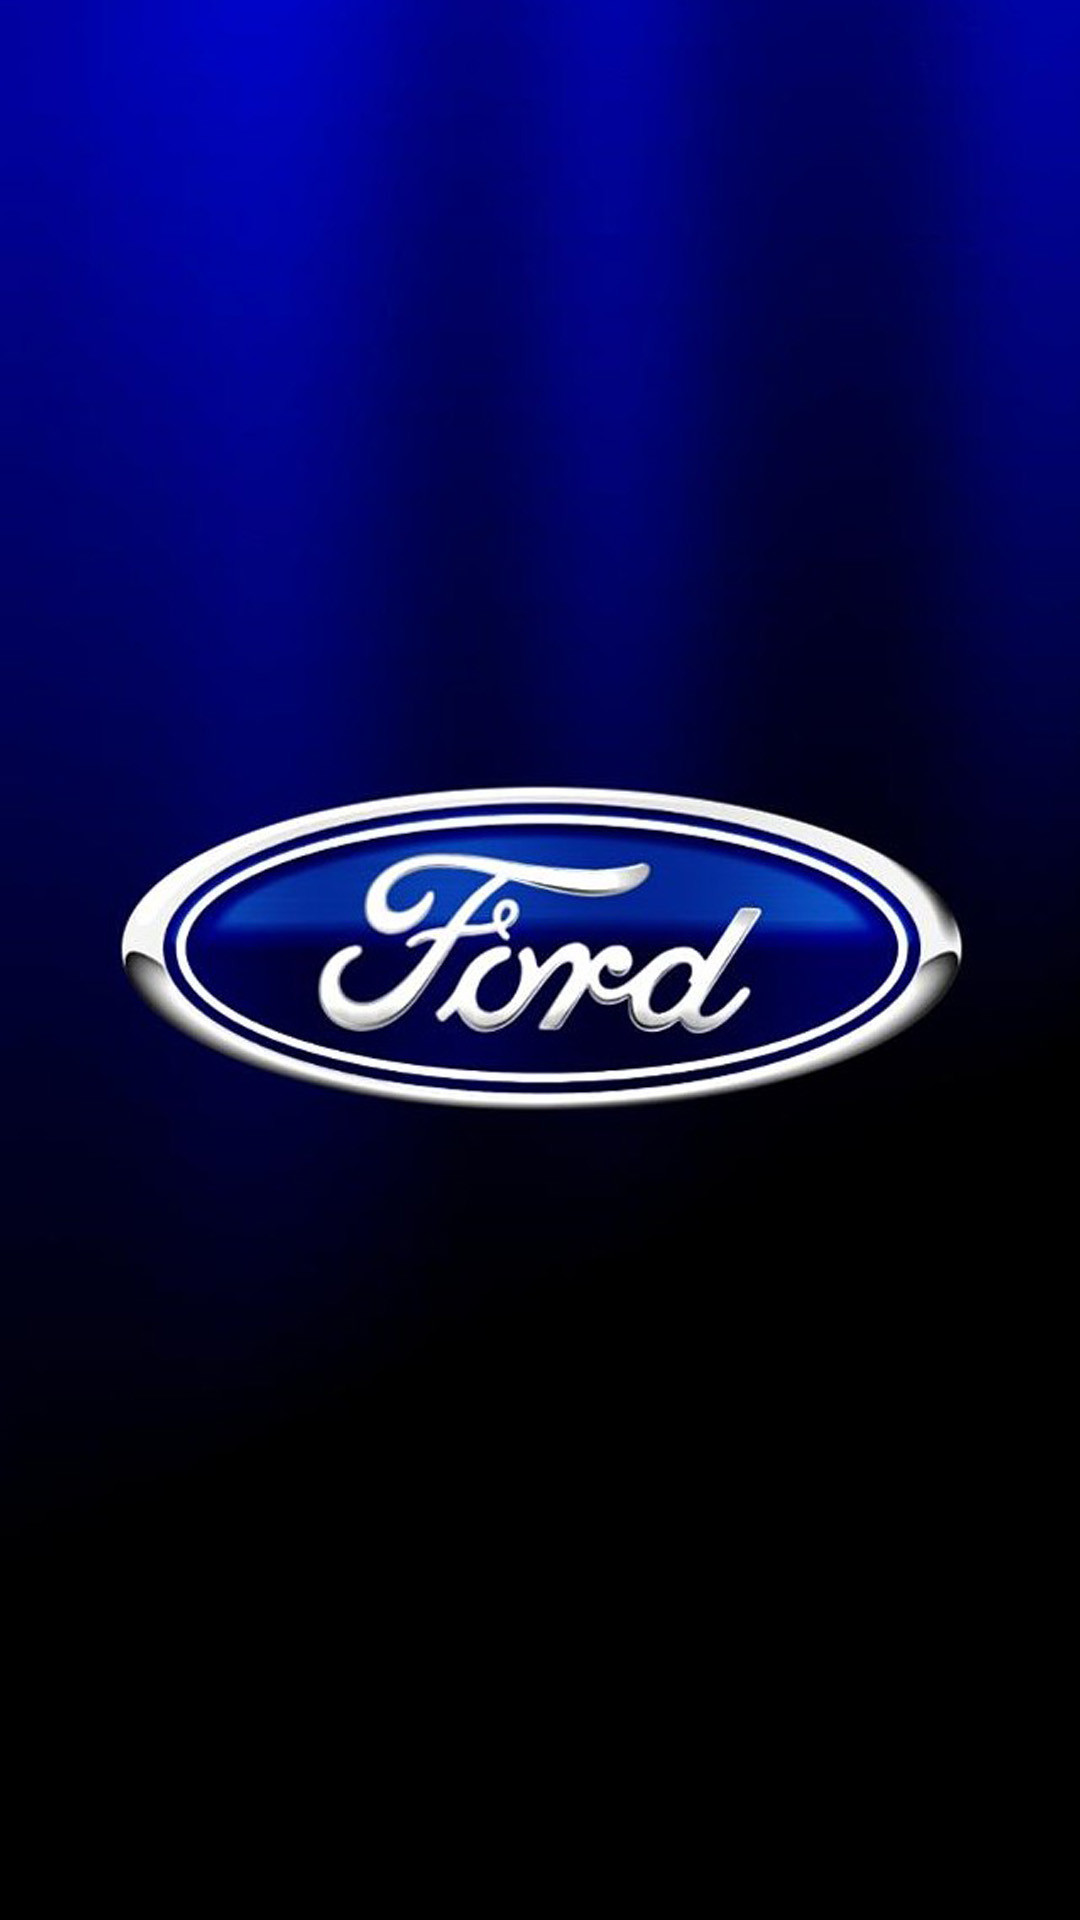 ford mustang logo wallpapers – Quoteko.com